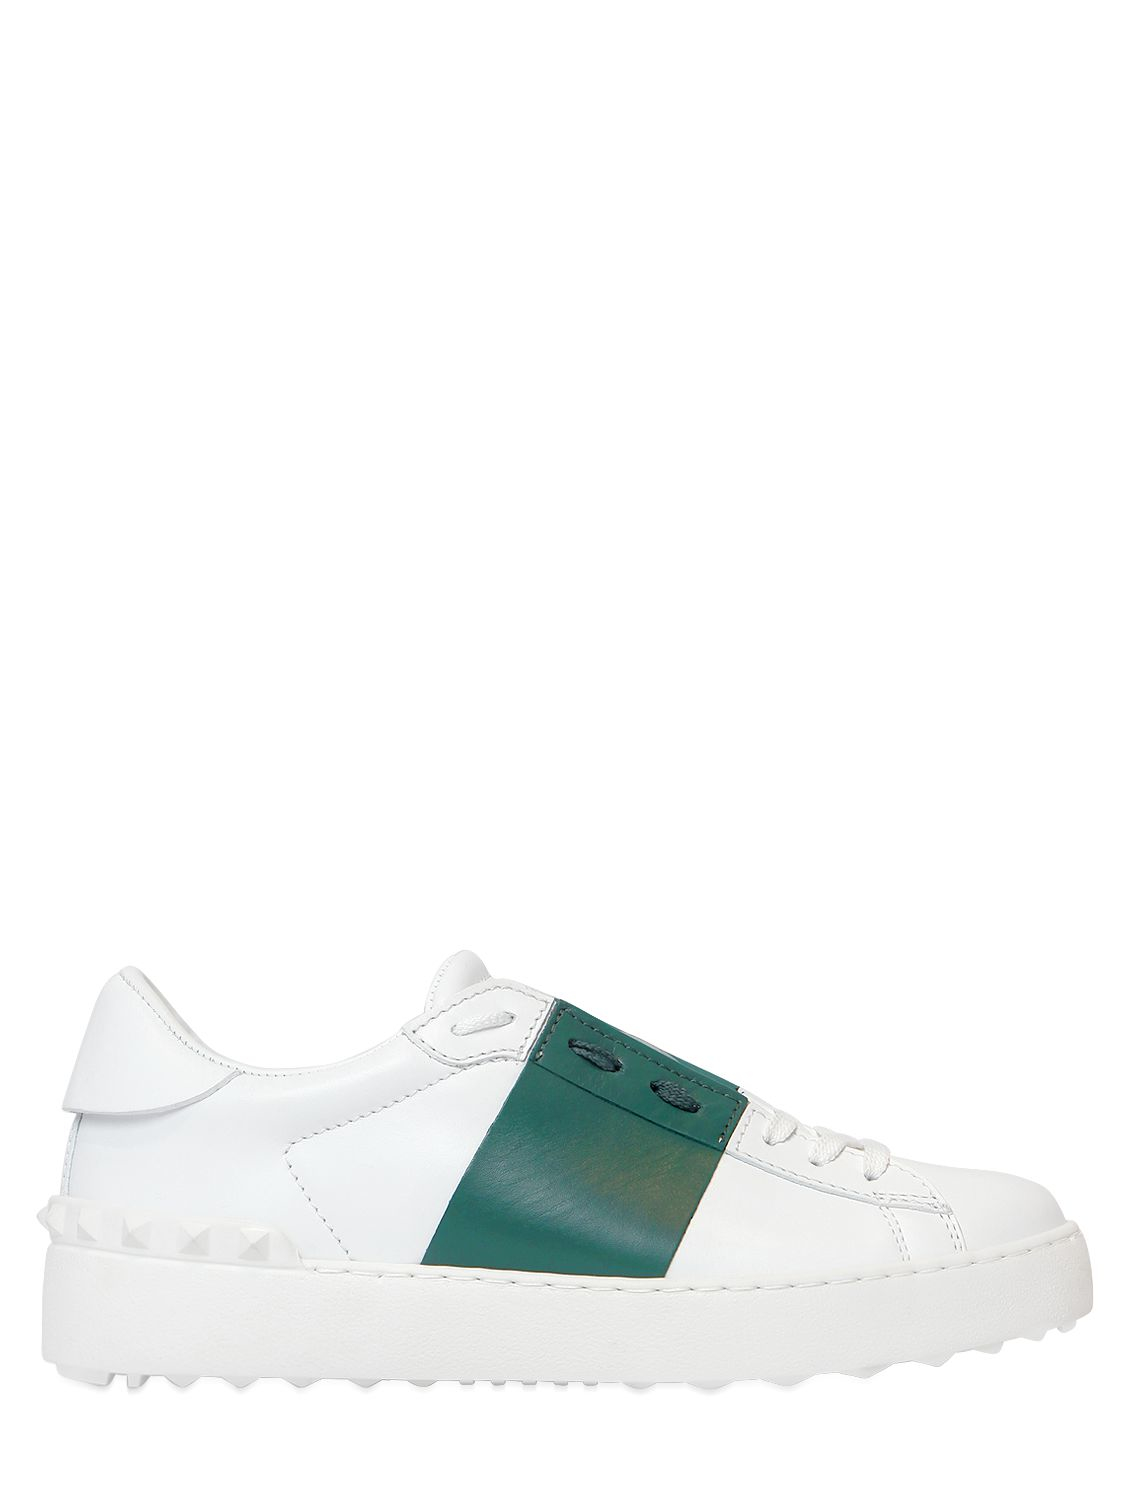 Valentino Open Color Block Leather Sneakers in White (WHITE/GREEN) | Lyst